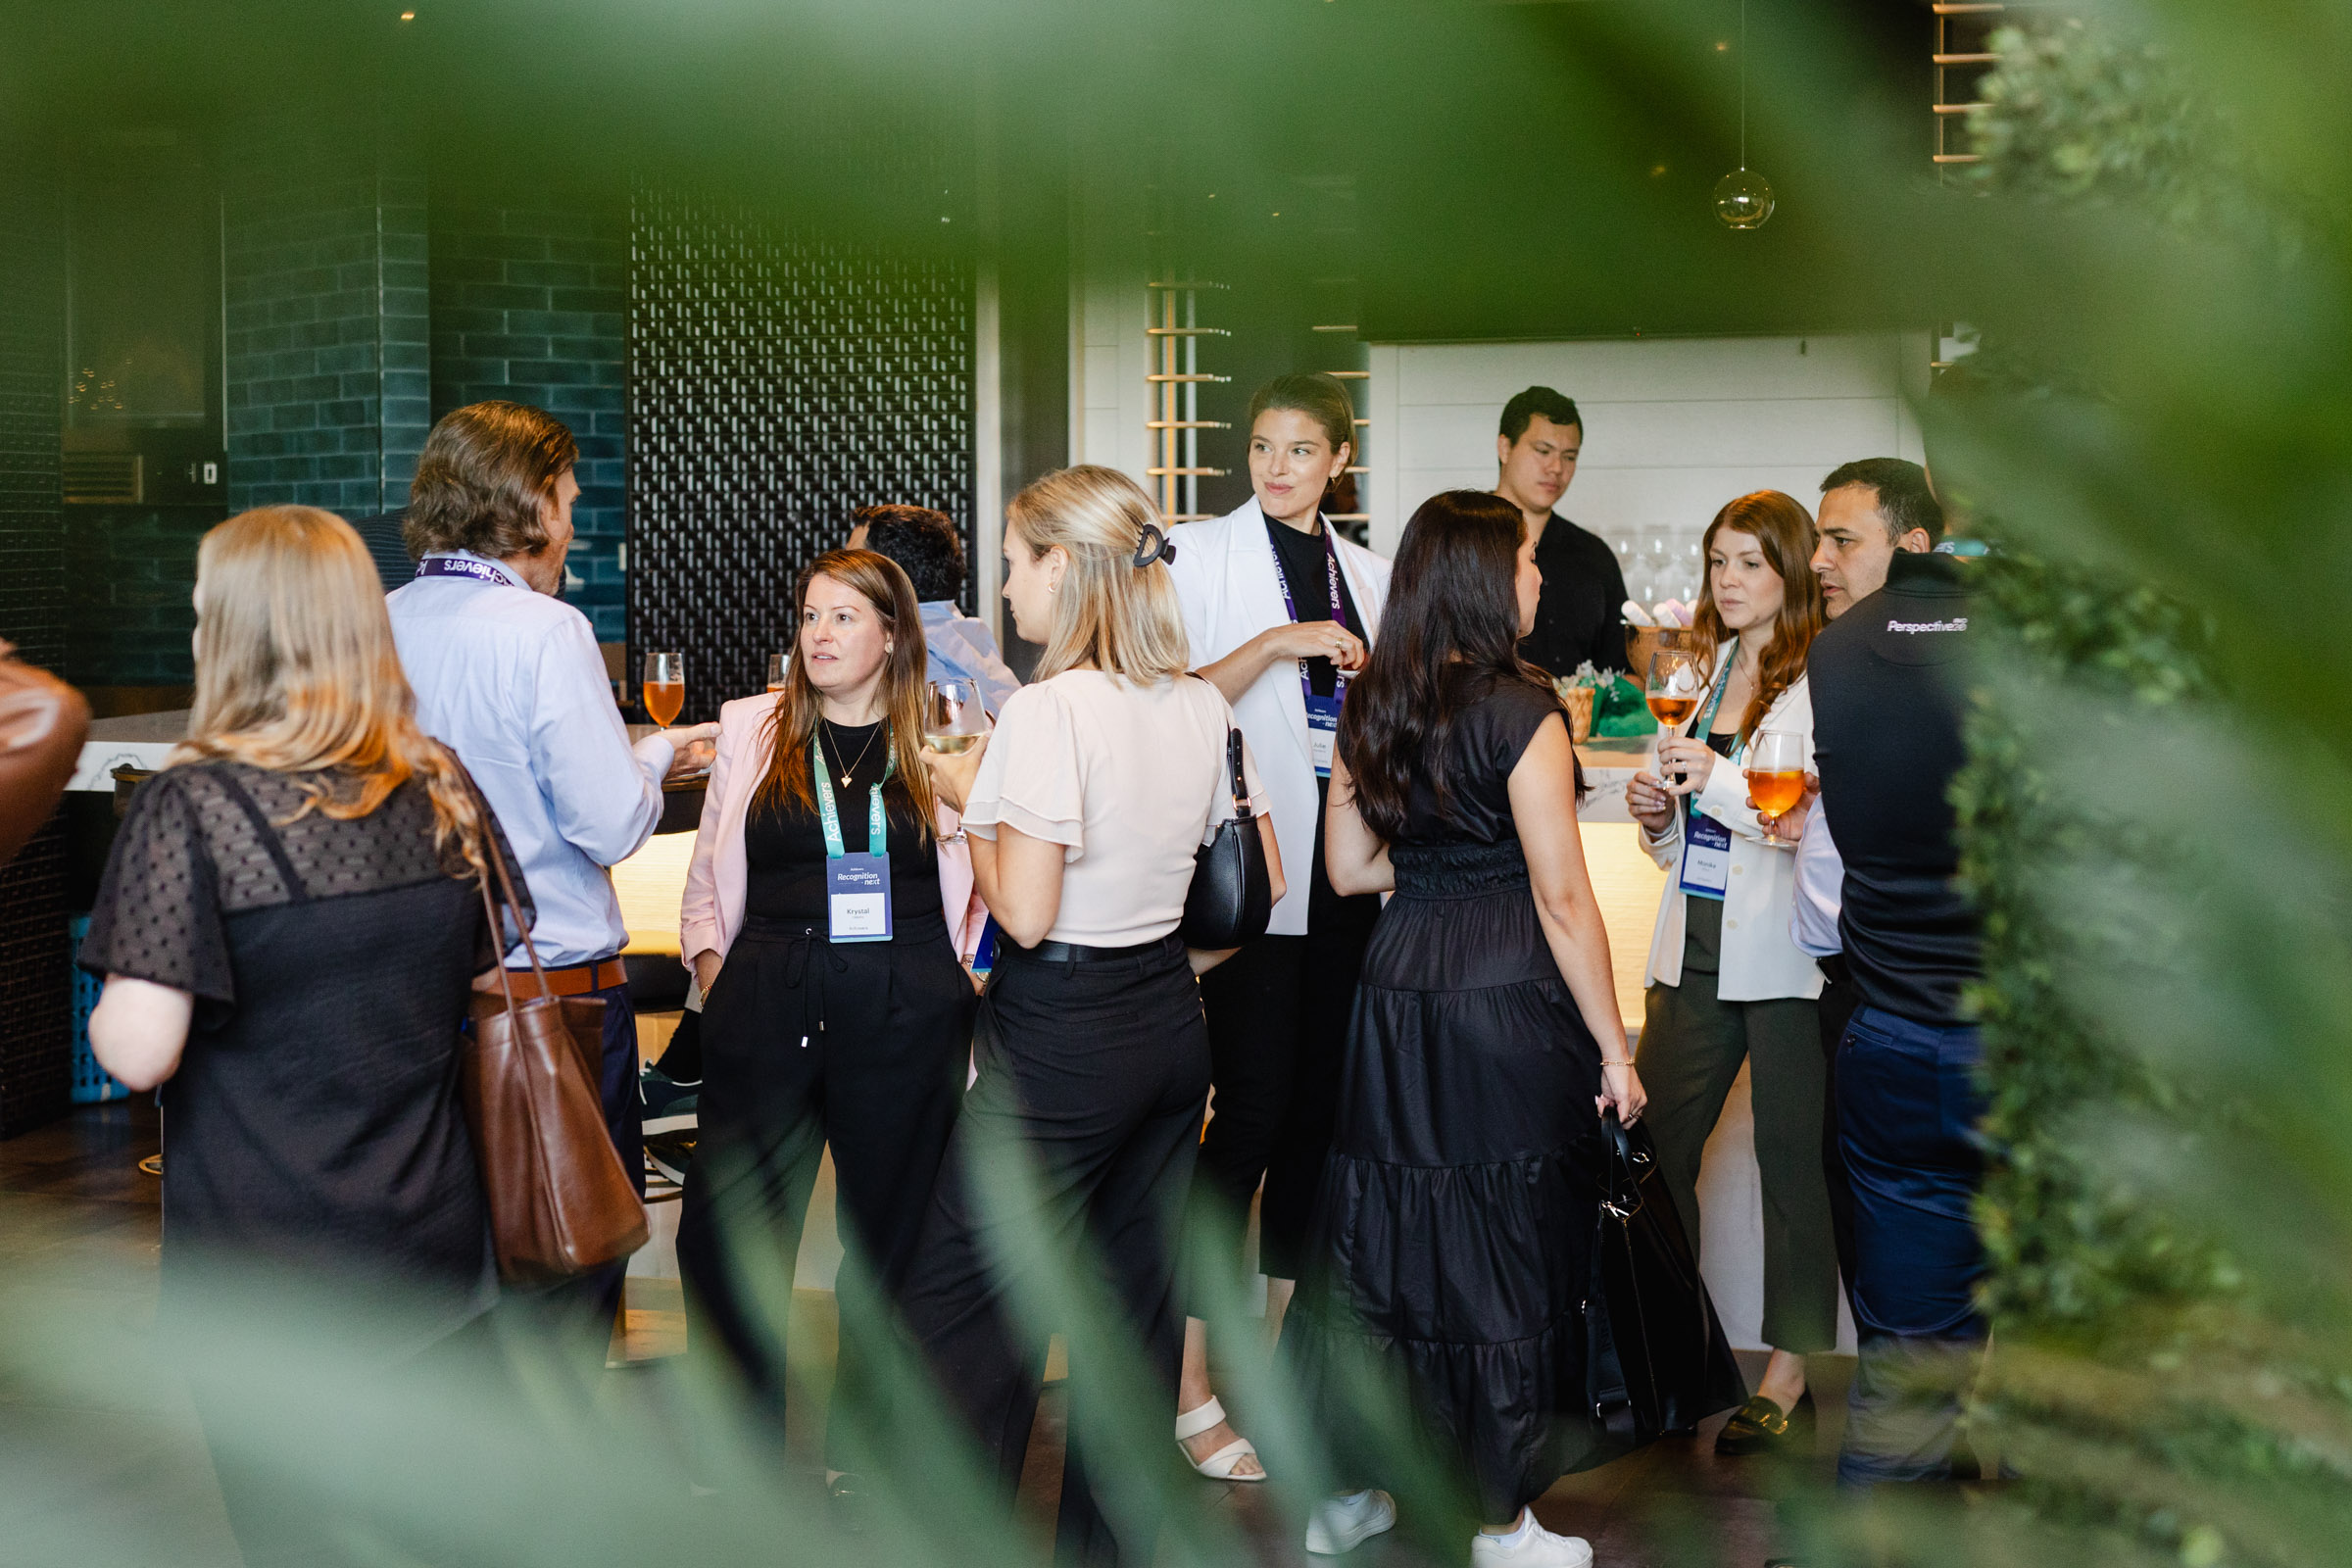 A group of people, dressed in business casual attire, are gathered in a modern indoor space, engaging in conversation while holding drinks. Some individuals, captured through corporate photography, are wearing name badges.